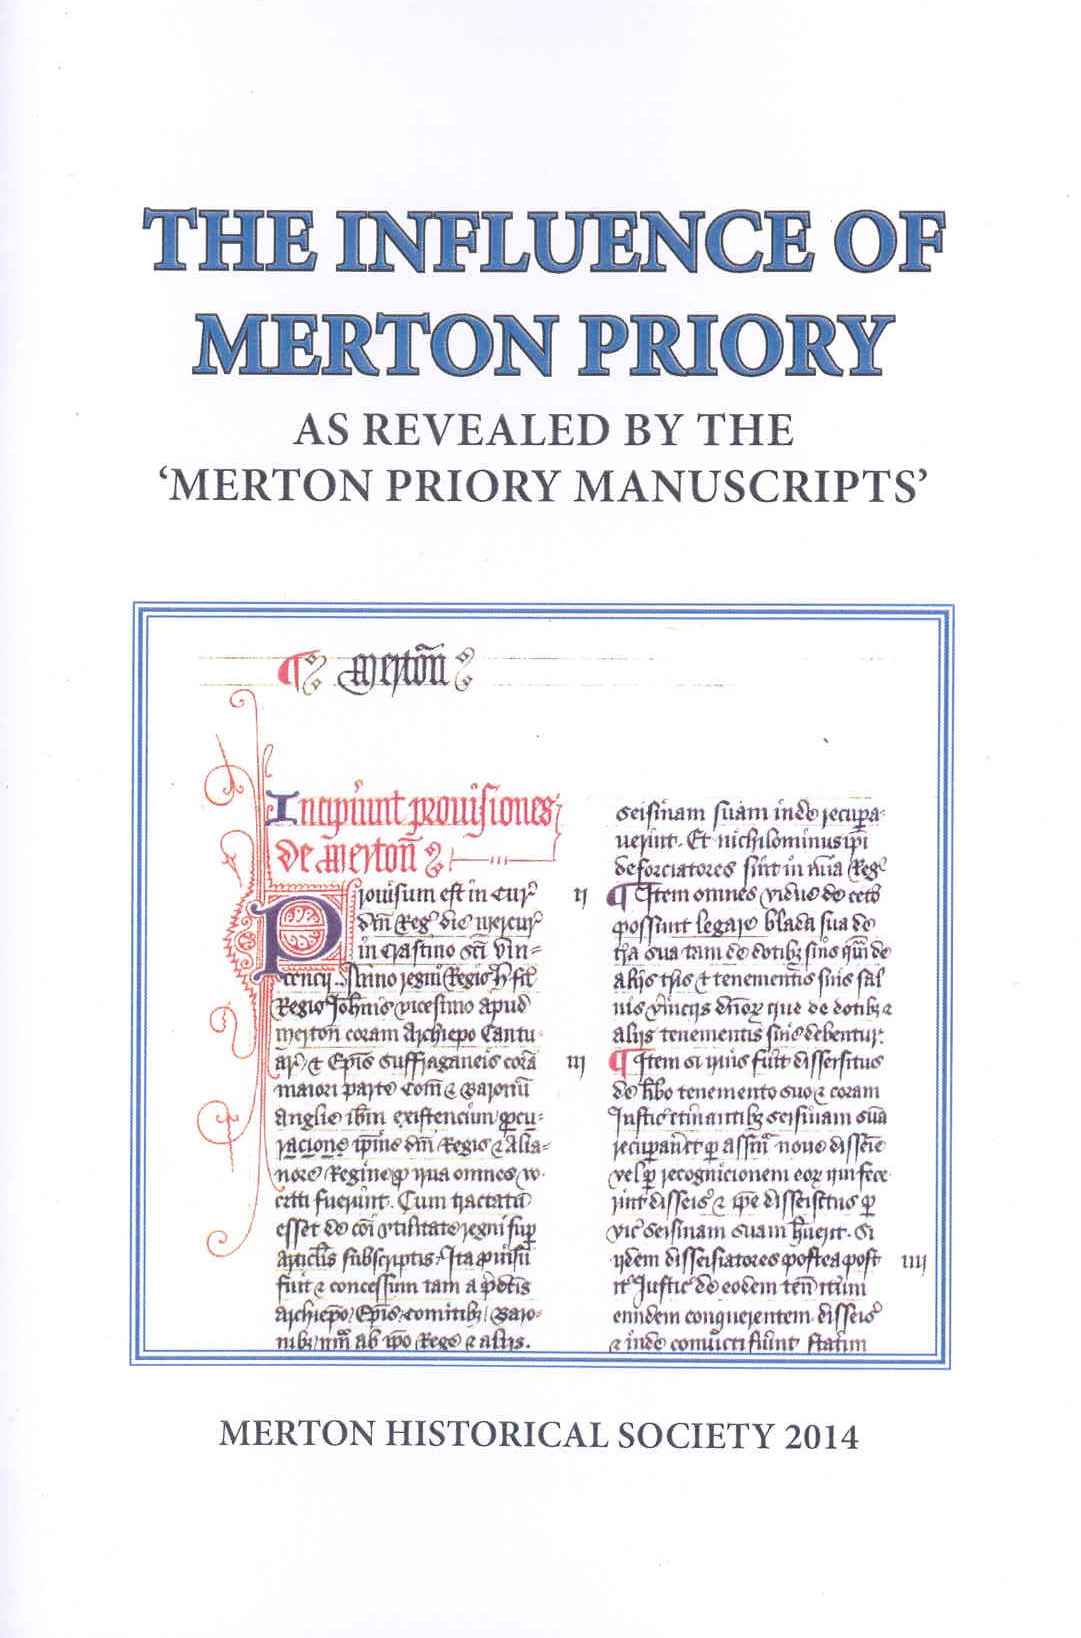 The Influence of Merton Priory